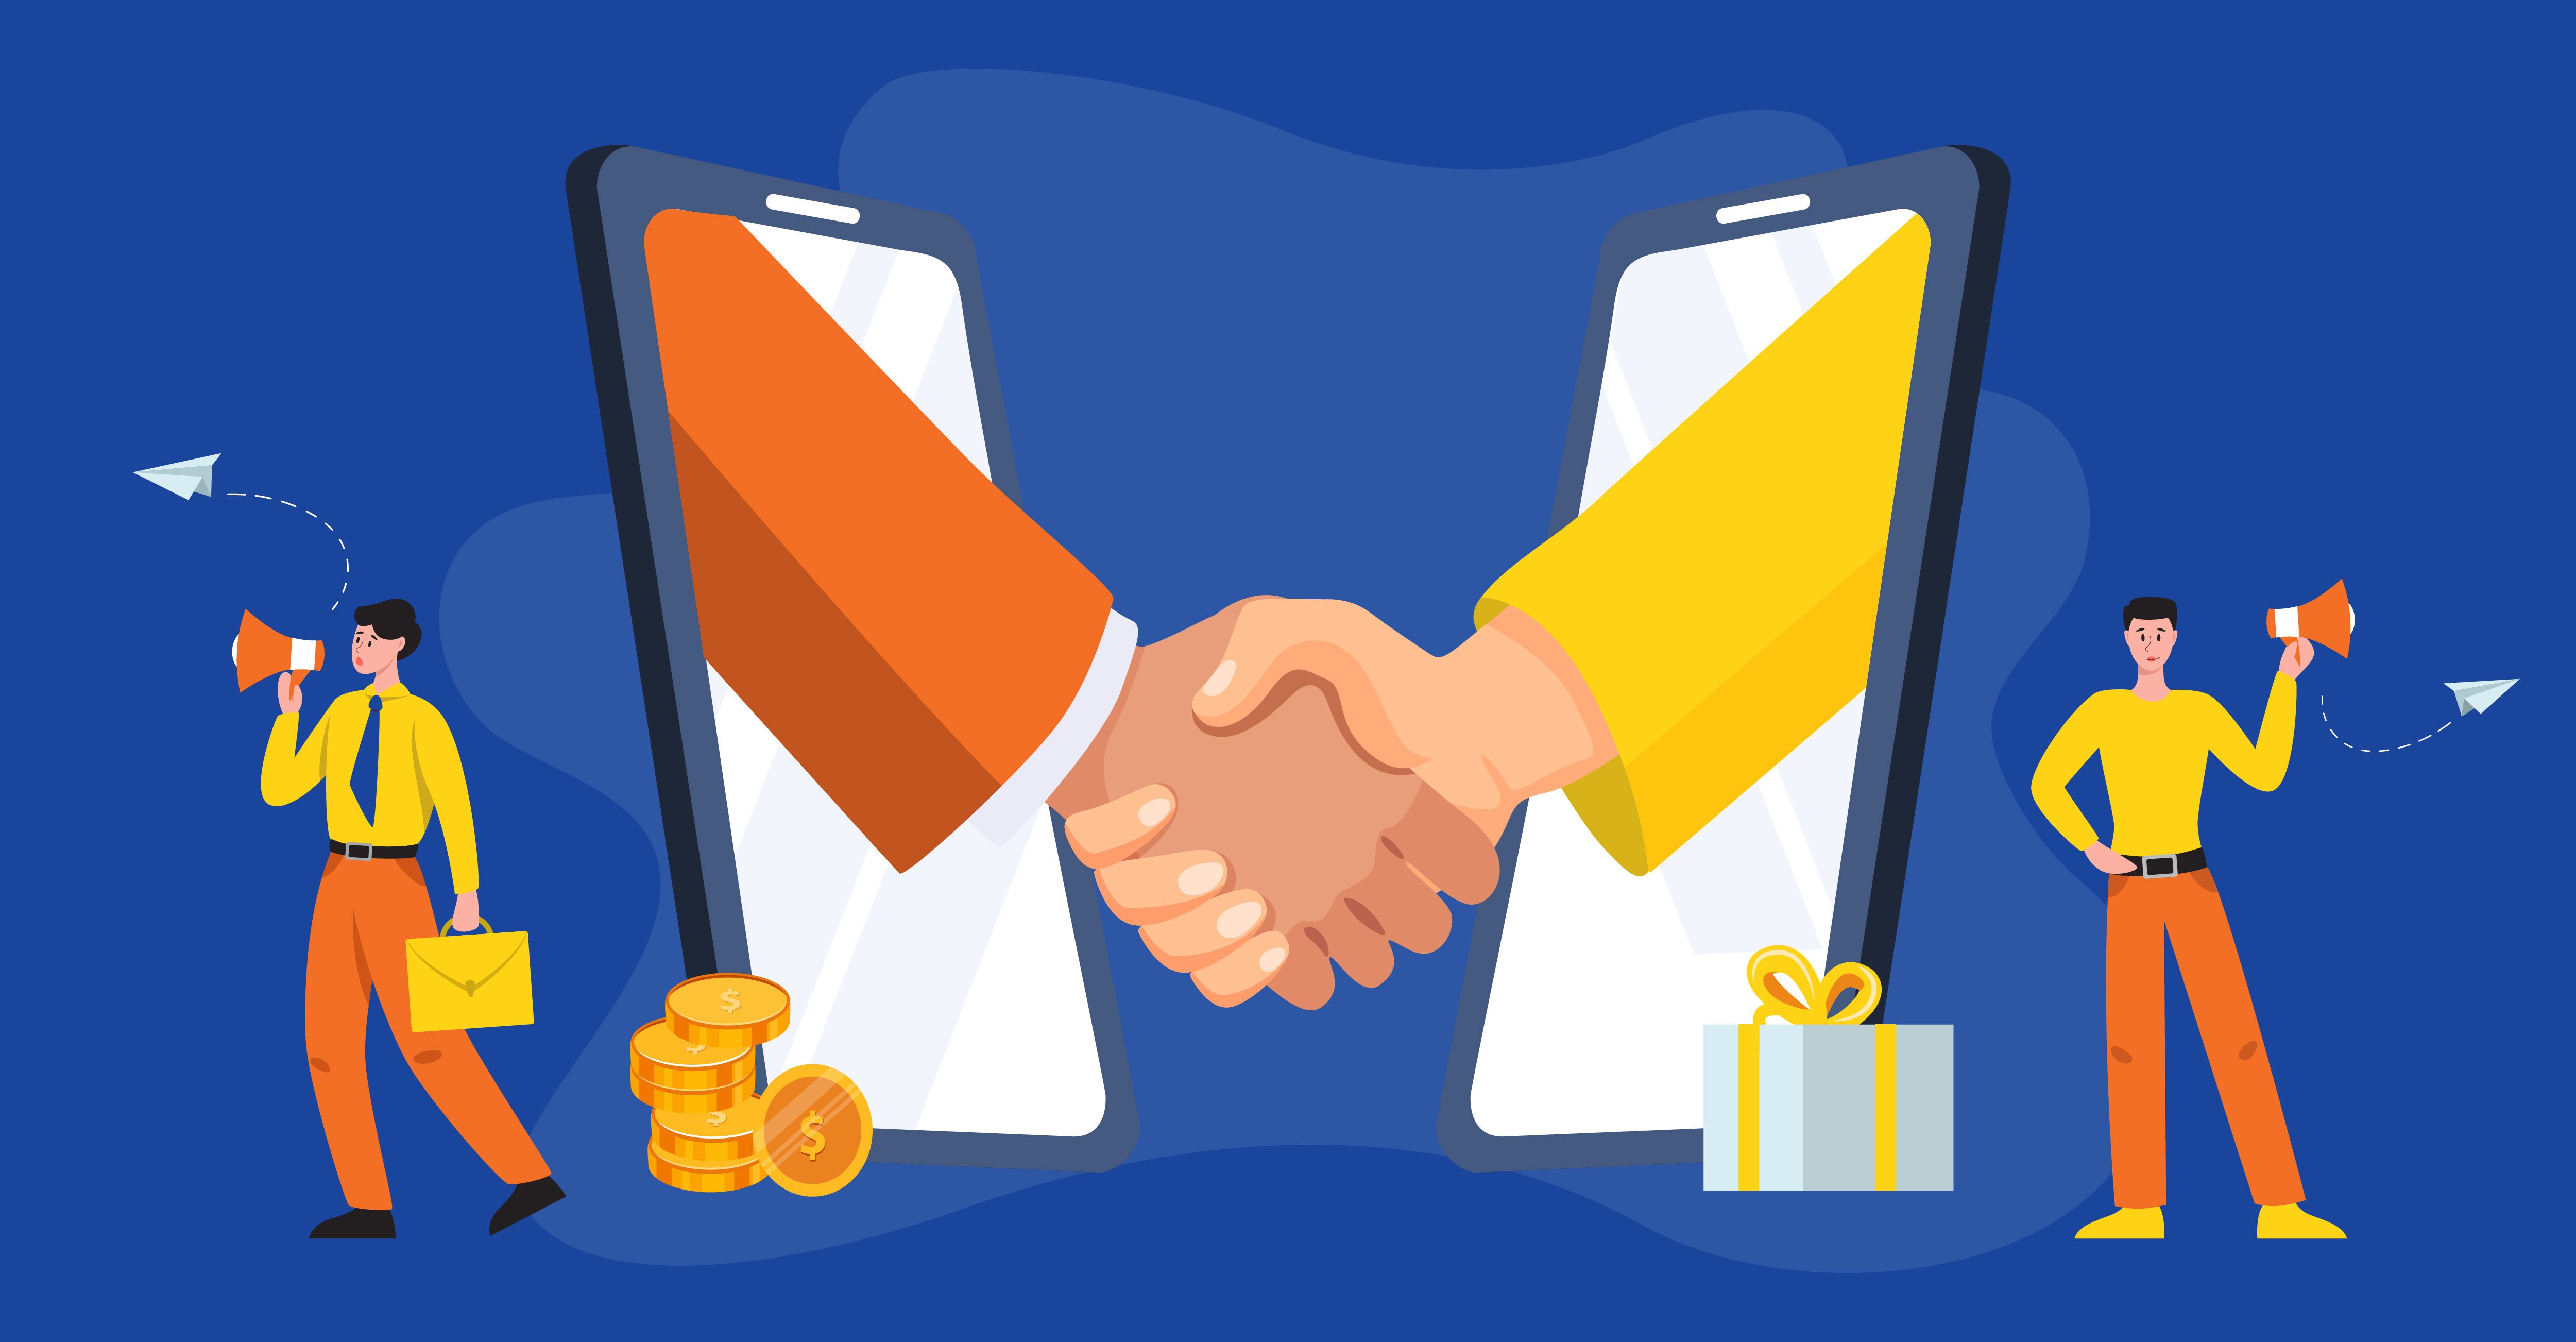 Tips on Starting a Referral Program for Your Business